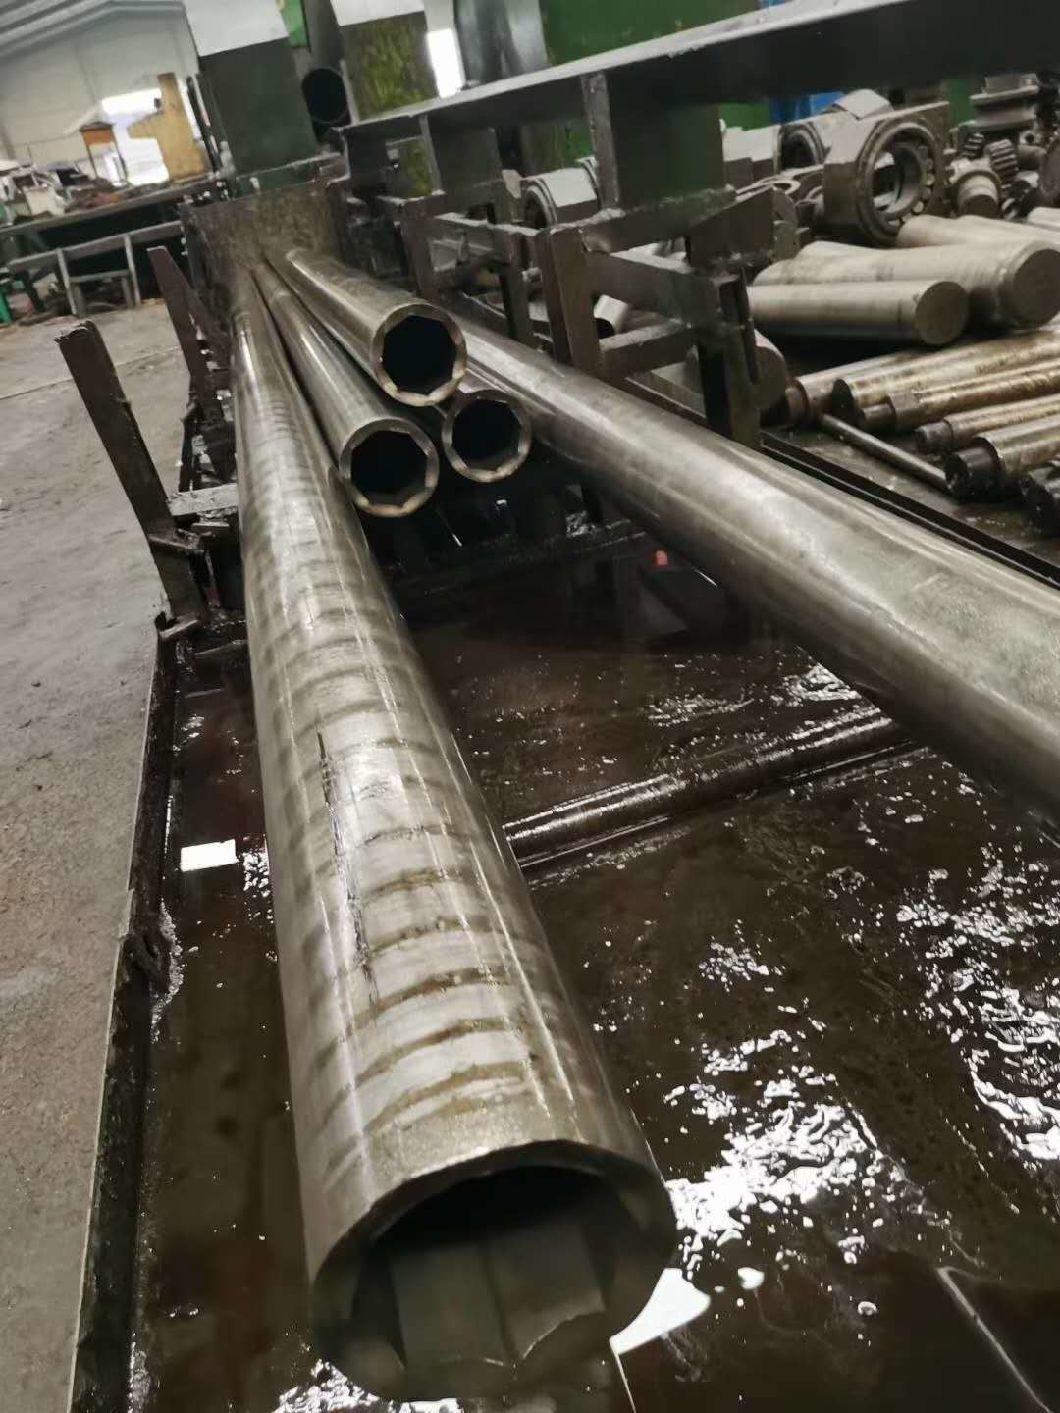 DN50 Carbon Steel Seamless Pipe for Pipeline